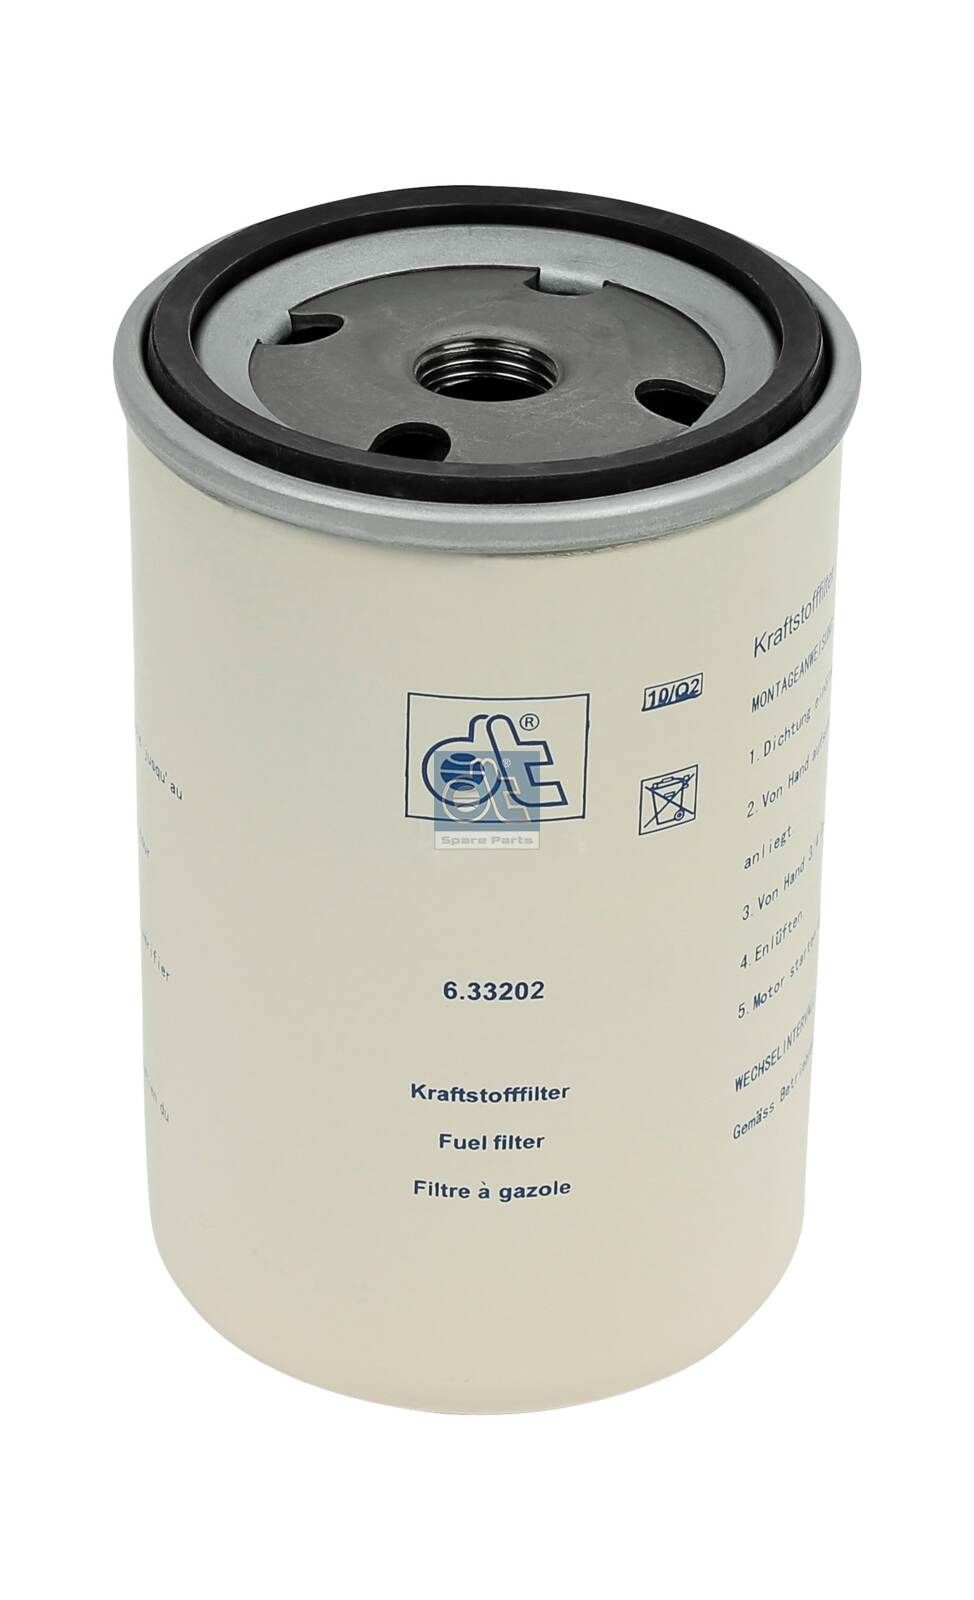 WK 727 DT Spare Parts 6.33202 Fuel filter 7 701 017 322